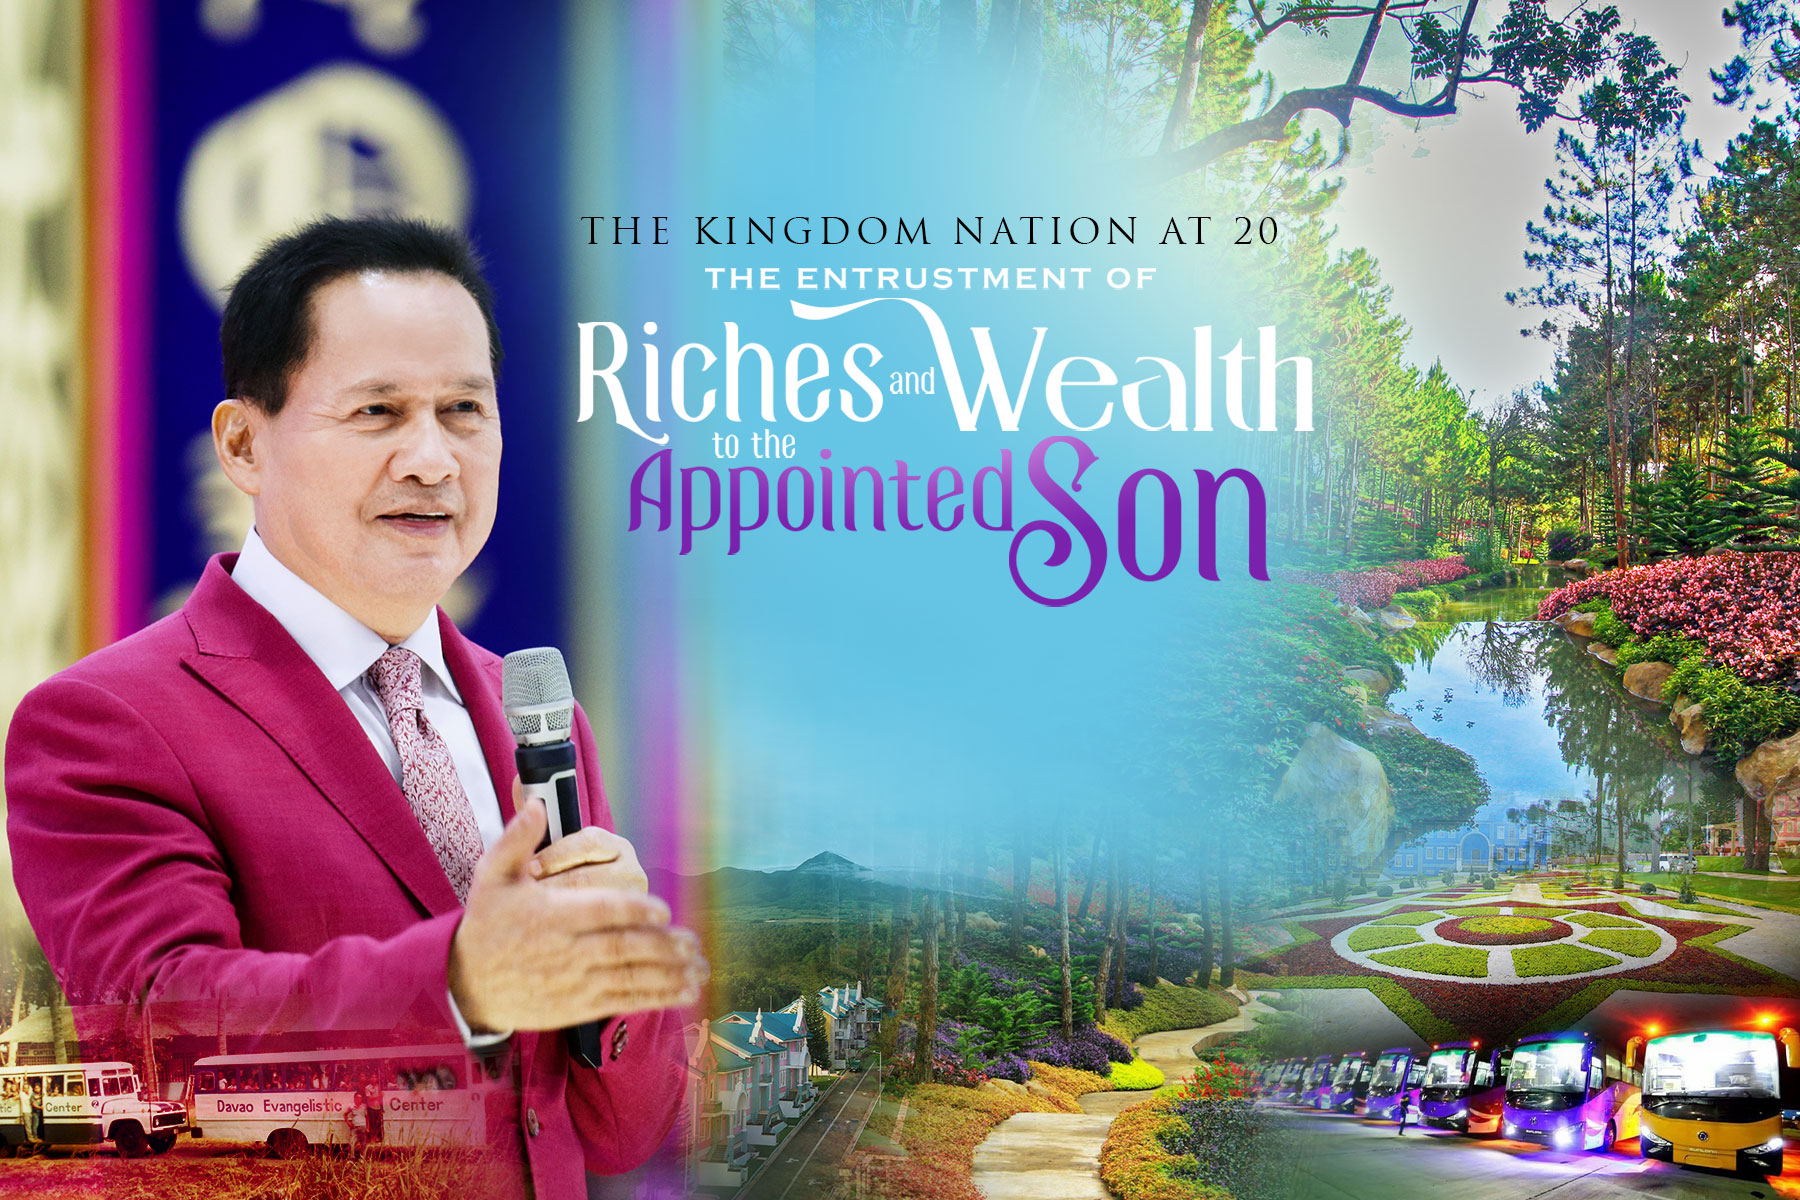 Riches and Wealth thumbs